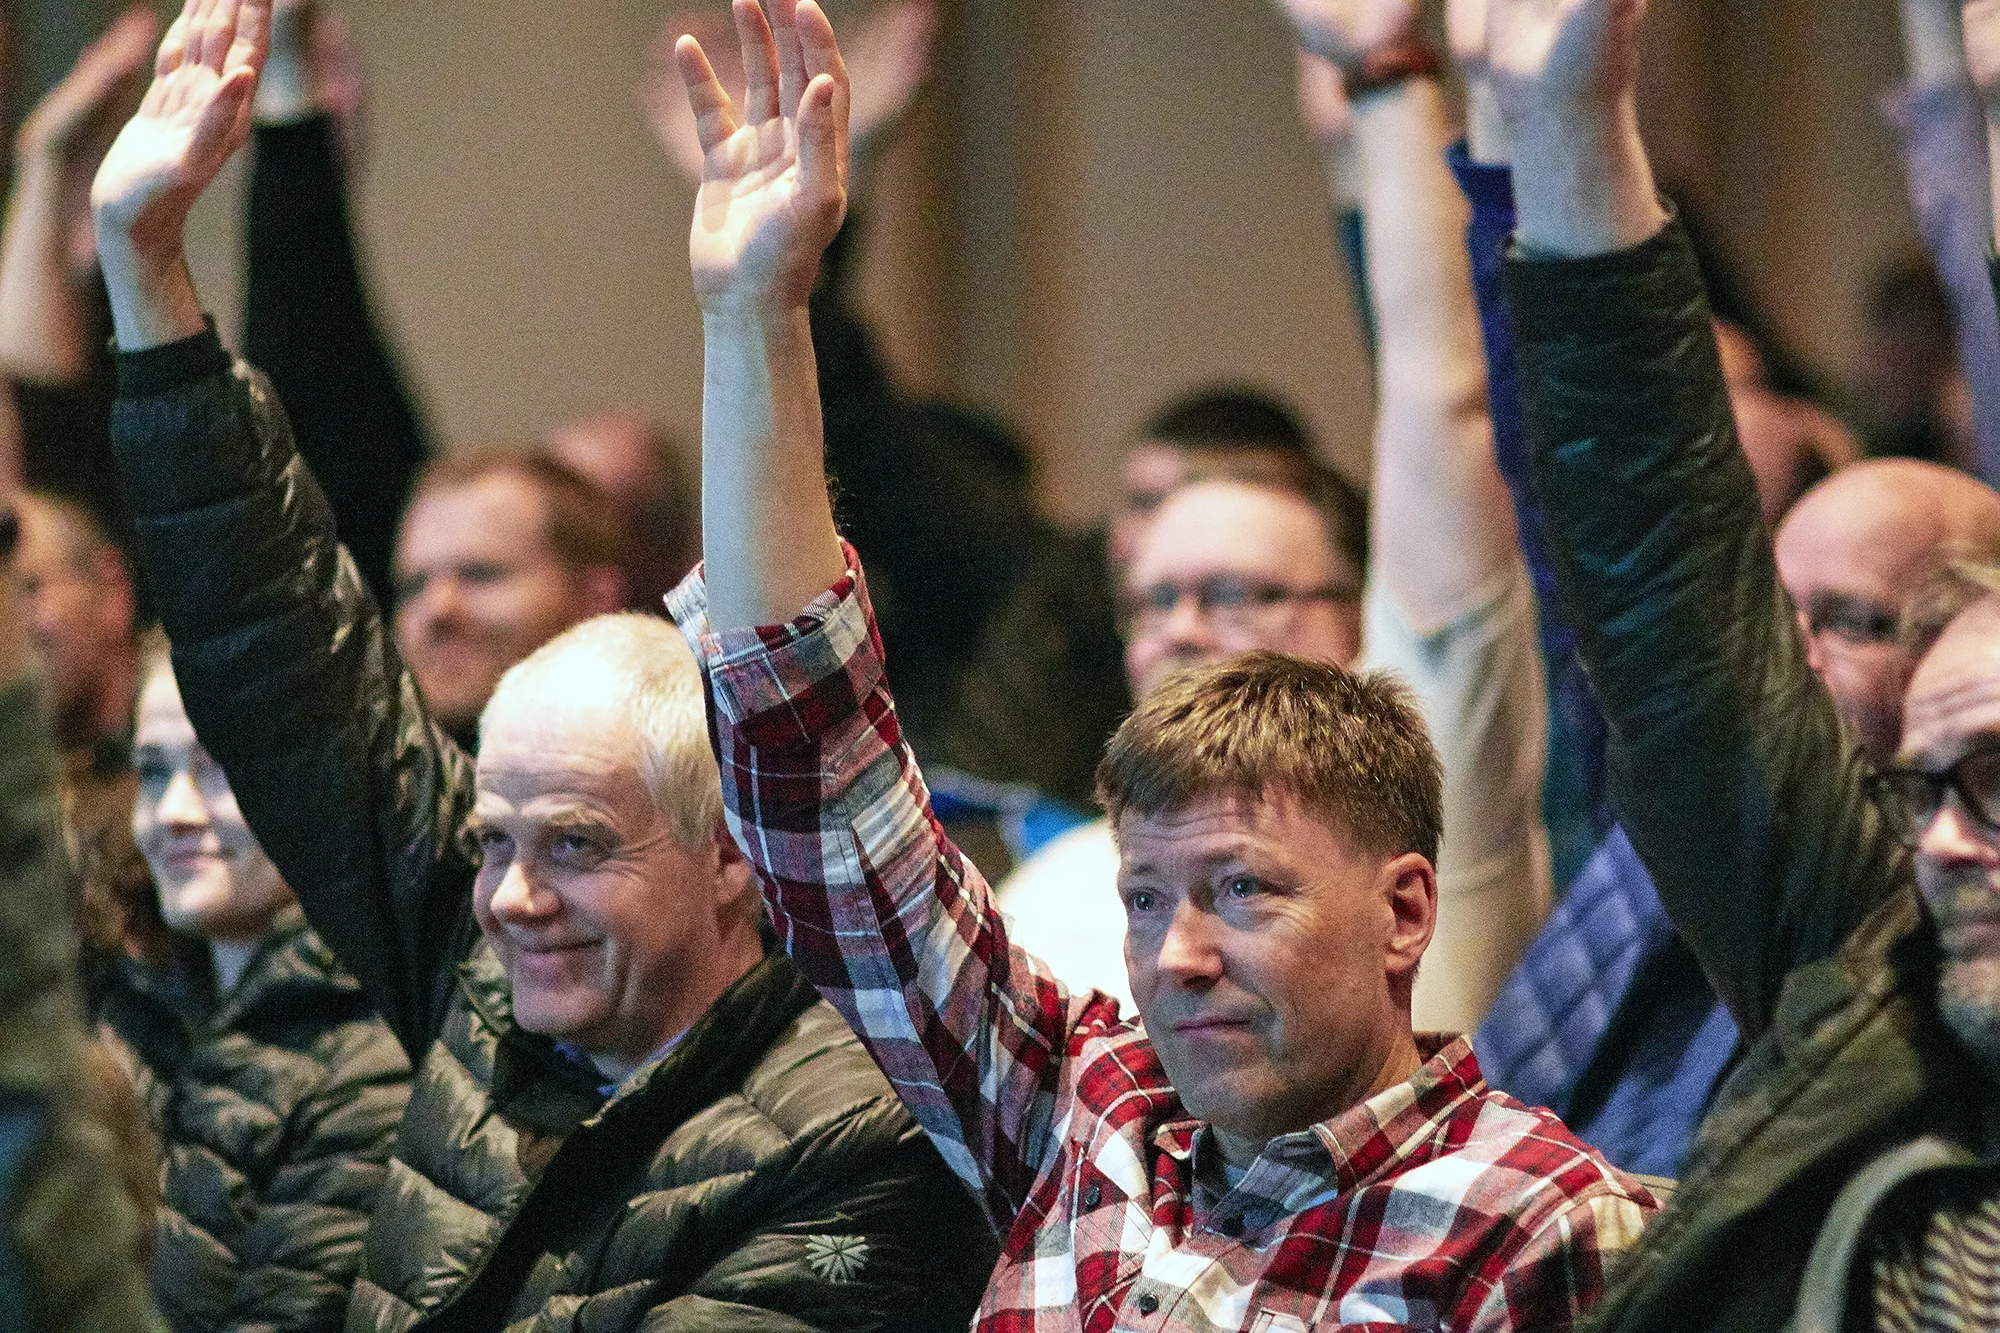 Older white males with one hand in the air